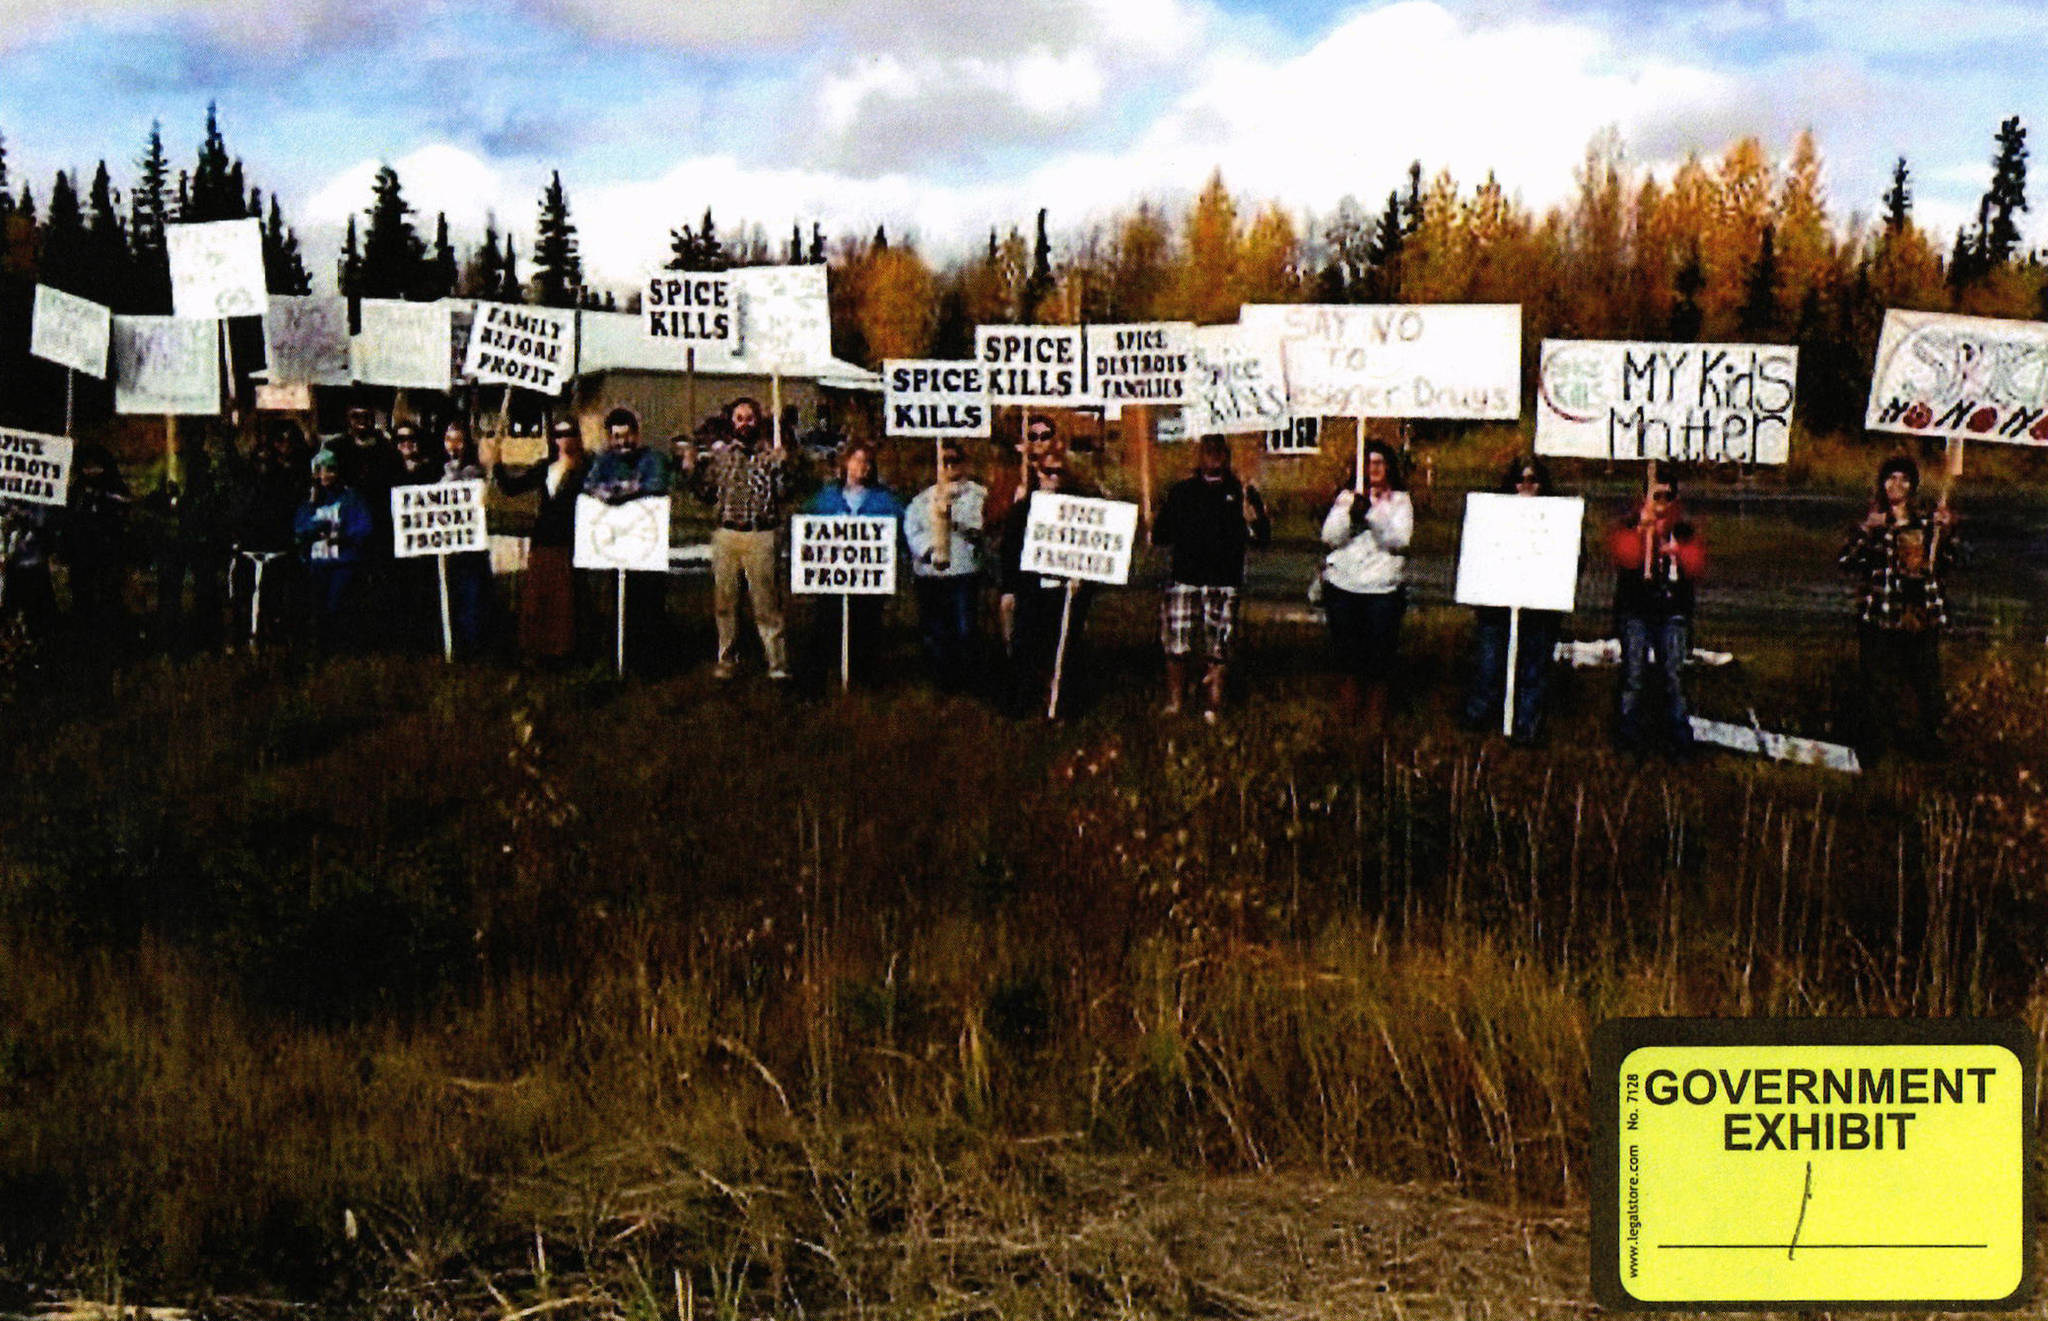 This October 2015 photo provided by the U.S. Department of Justice shows a protest staged in front of Tobacco Distress, a Soldotna-area store then allegedly selling the synthetic cannabis drug Spice near Soldotna, Alaska. Tobacco Distress owner Phillip Kneeland was sentenced to 70 months in prison Friday for selling the drug, which caused a number of people on the Kenai Peninsula to be taken to the hospital after taking it. (Photo courtesy the U.S. Department of Justice)